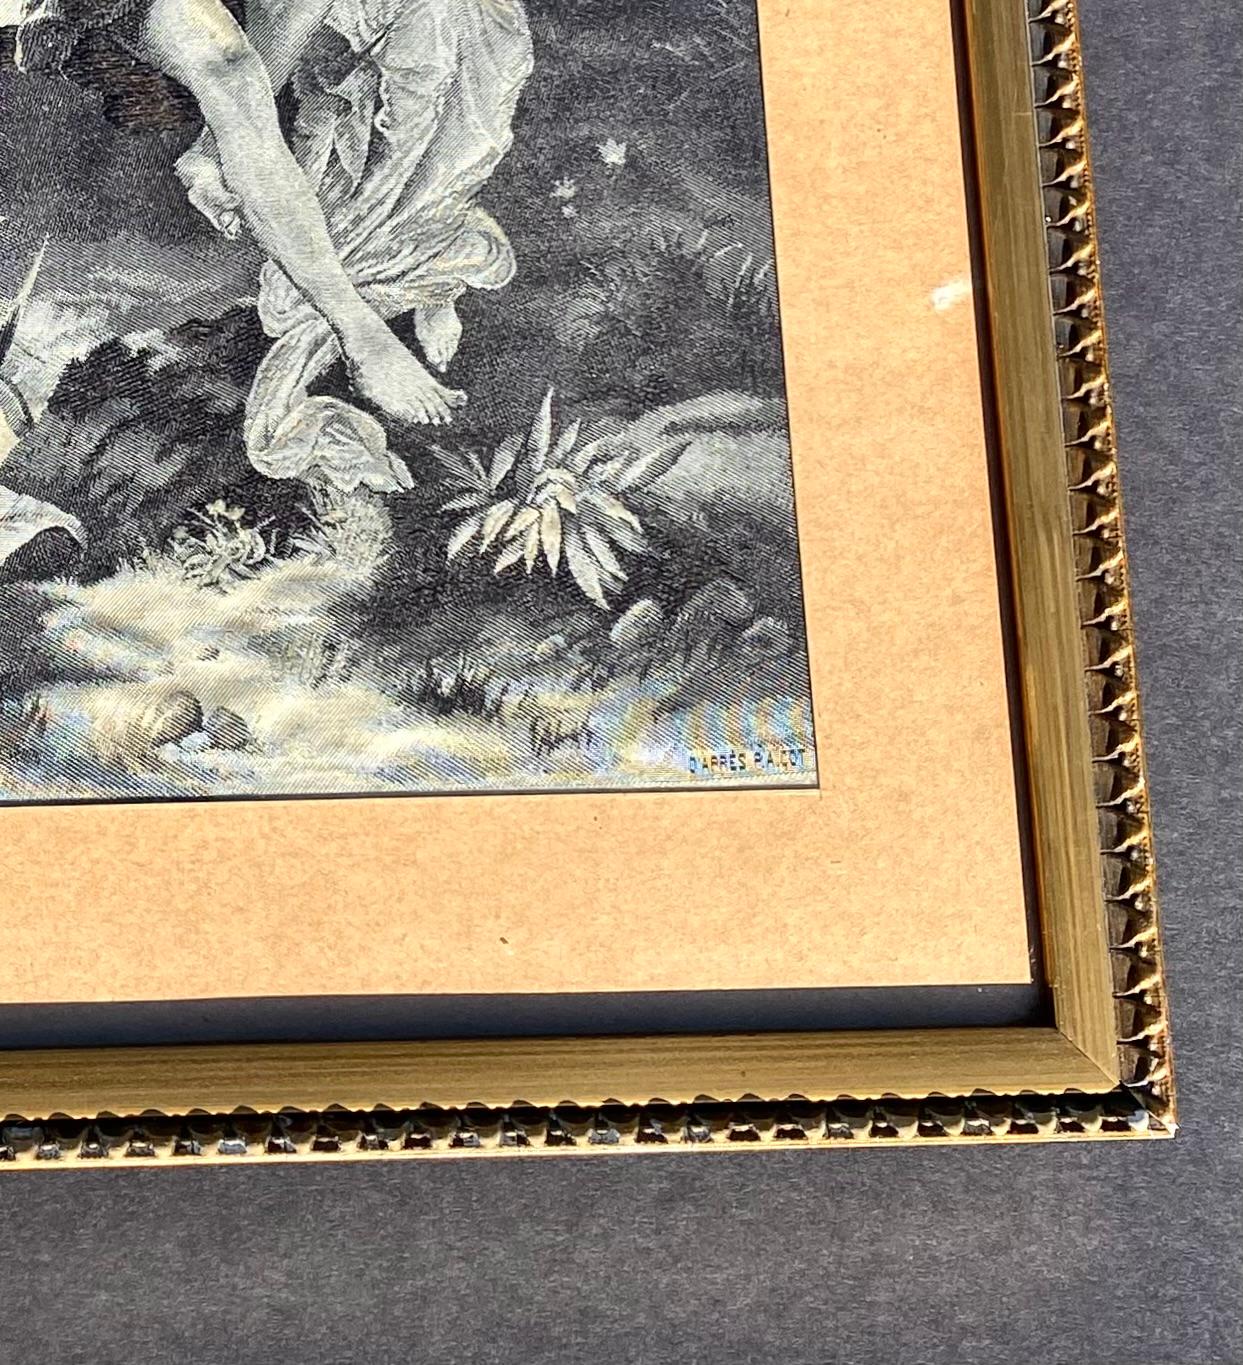 Exquisite Rare late 19th C Antique French Neyret Freres Woven Monochrome Silk Pictures, “Printemps” (Spring) and “The Storm or Daphnis et Chloe” after Paintings by French Artist Pierre Auguste Cot, 1837 - 1883. A Wonderful Addition for any Home or